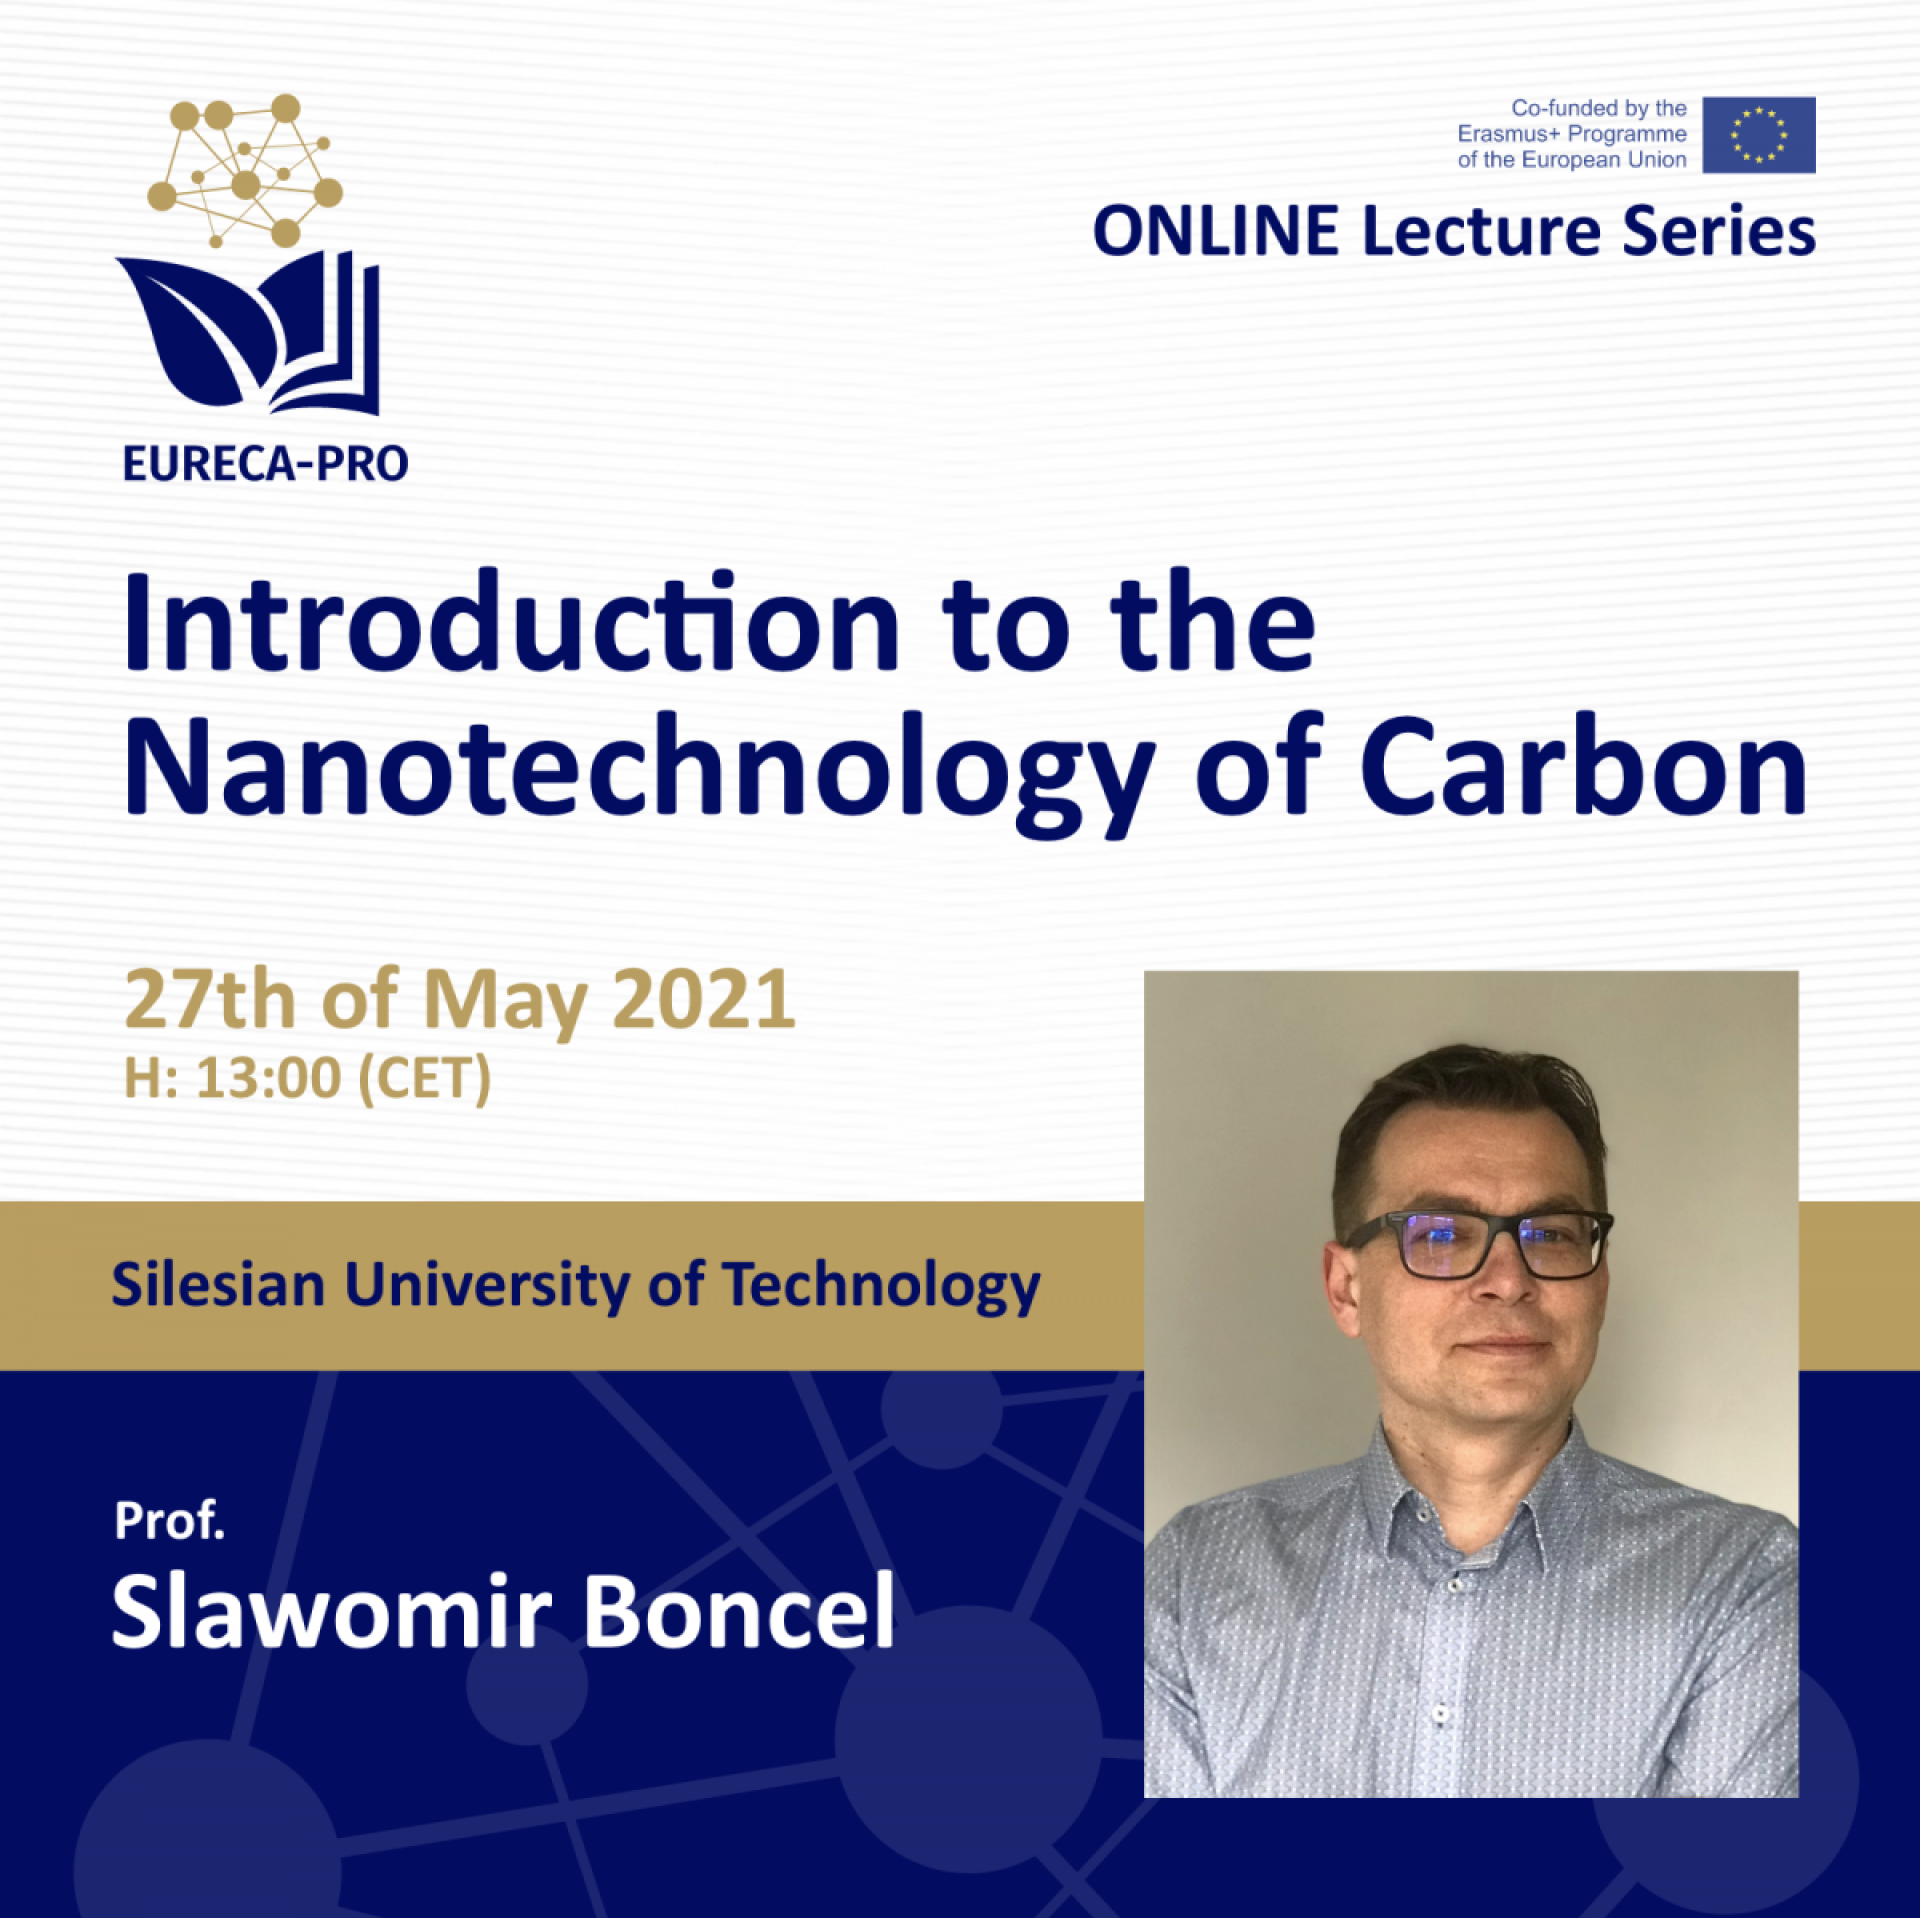 Introduction to the Nanotechnology of Carbon